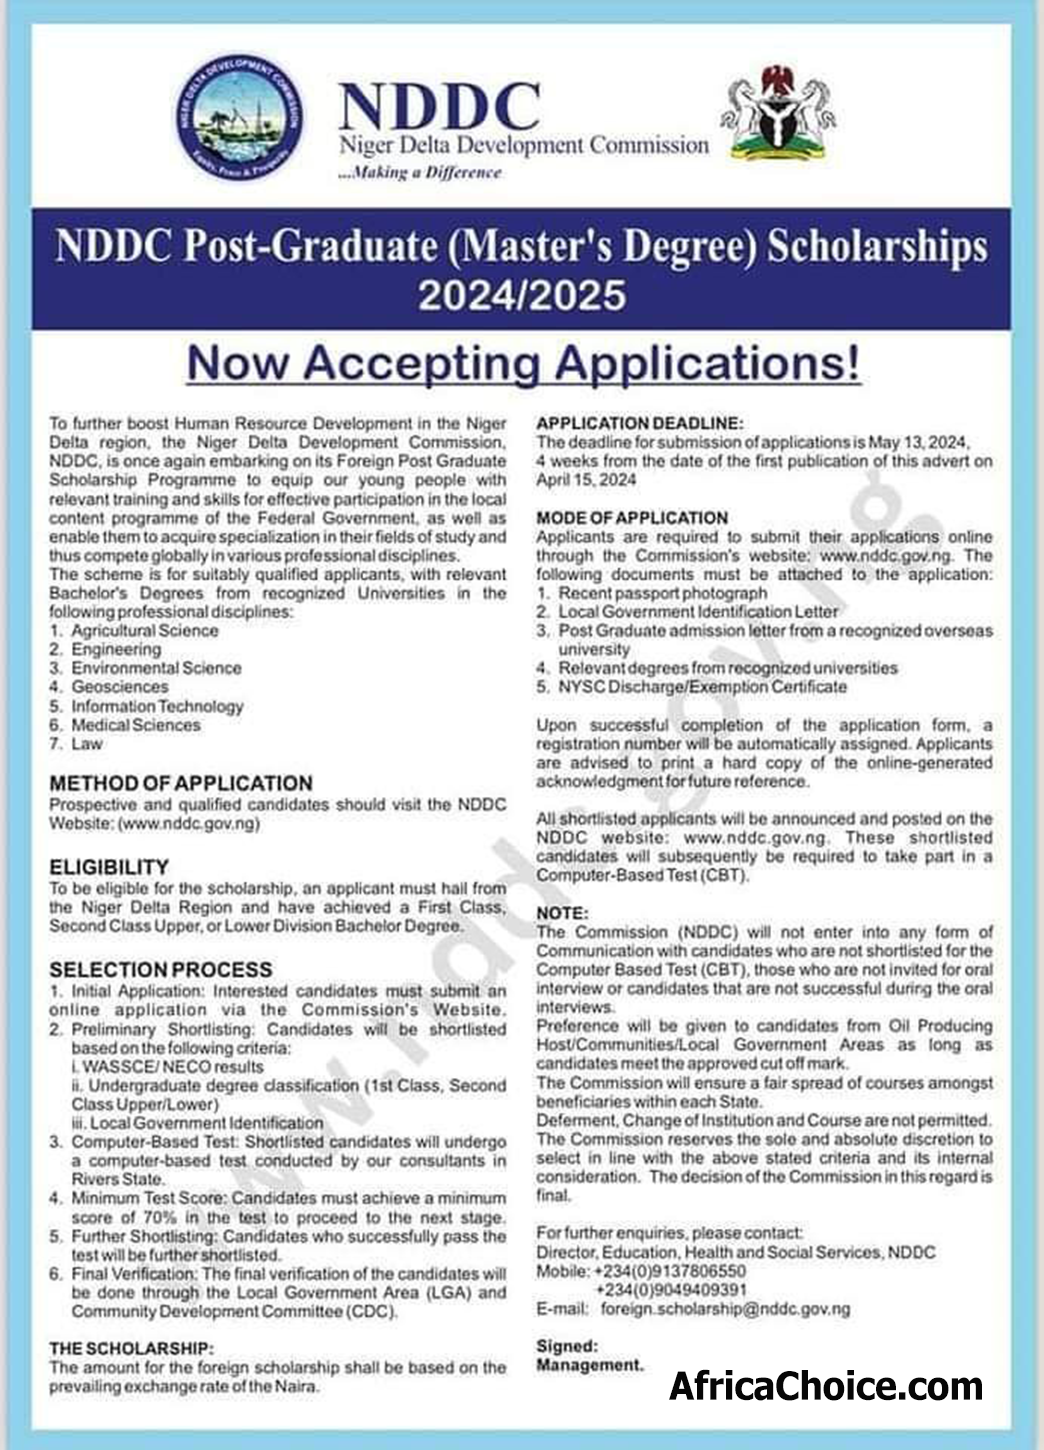 Apply-For-NDDC-Post-Graduate-And-Master-Degree-Scholarships-2024.png